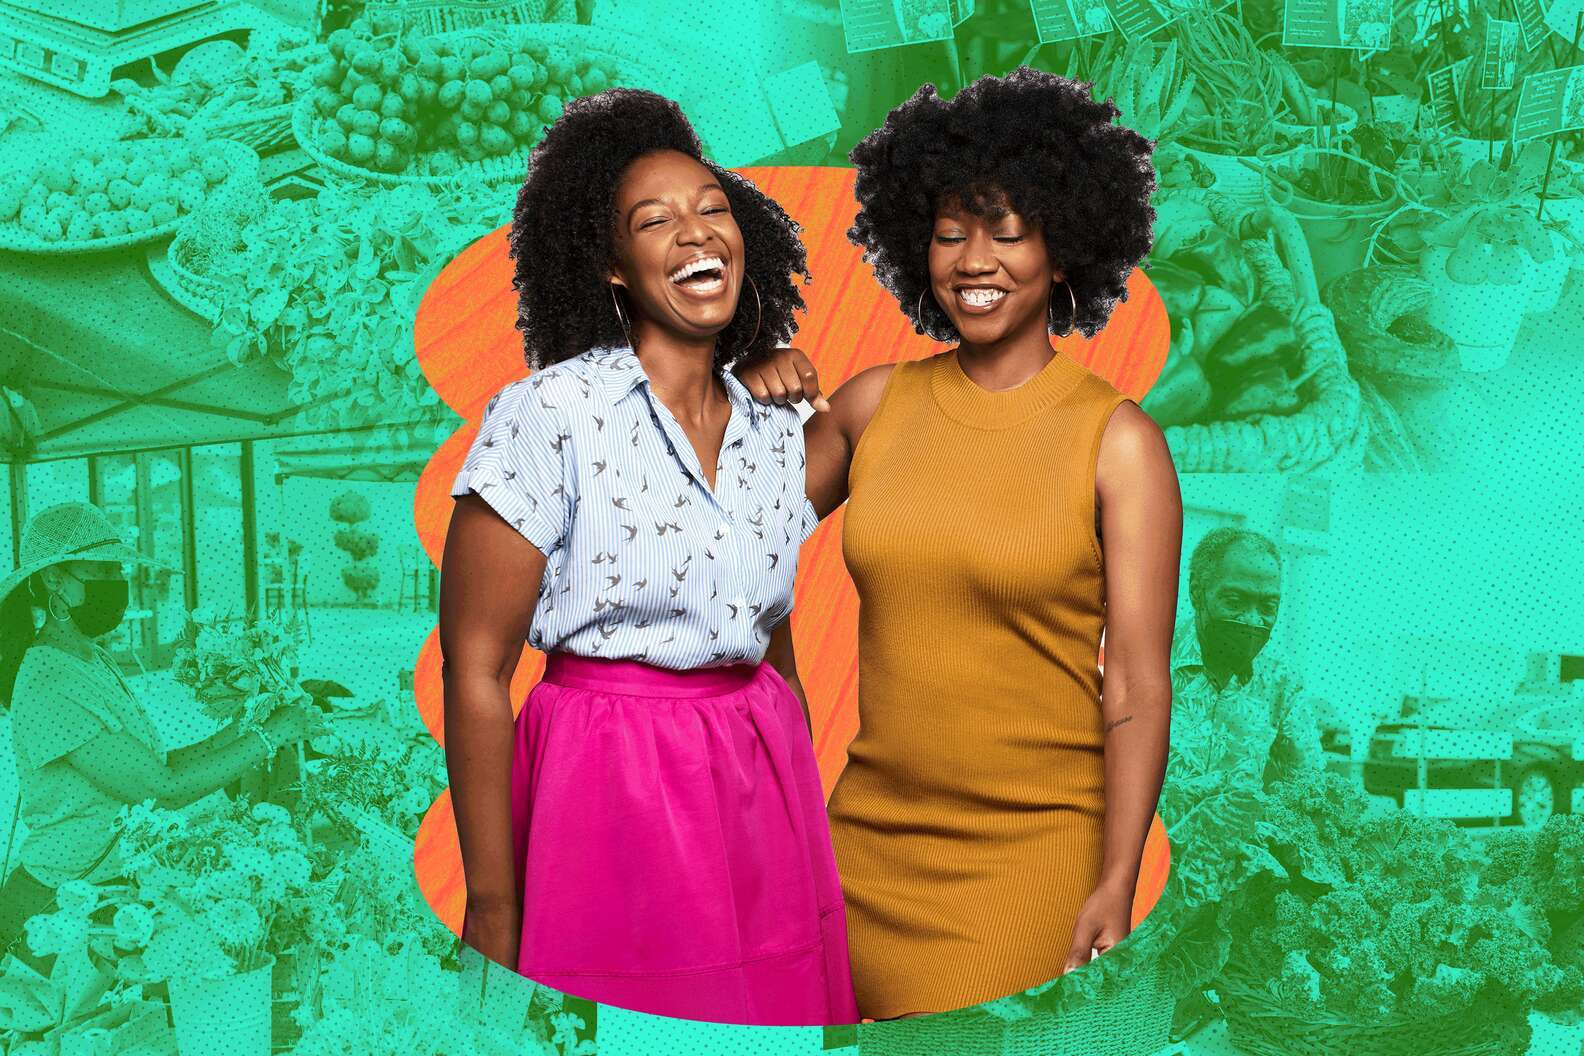 Shop Small and Black-Owned in LA with Prosperity Market